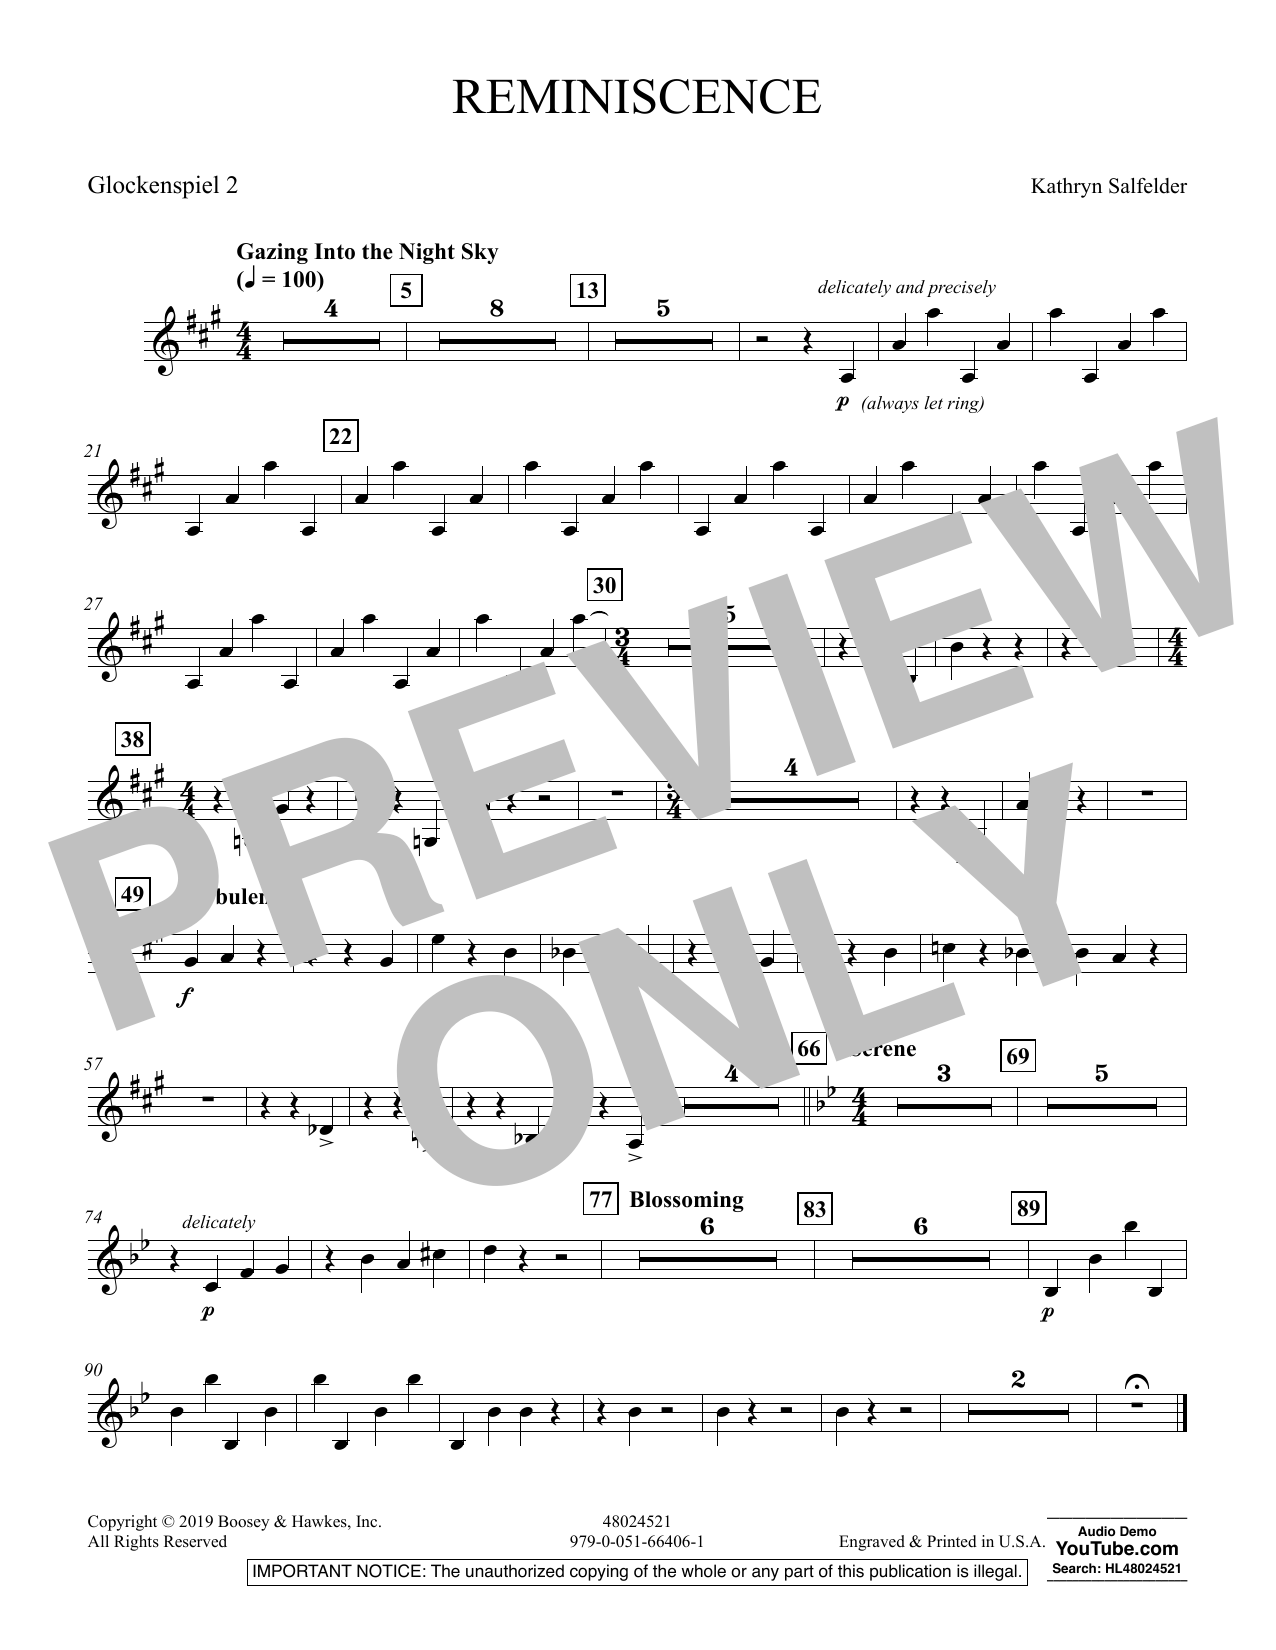 Kathryn Salfelder Reminiscence - Glockenspiel 2 sheet music preview music notes and score for Concert Band including 1 page(s)